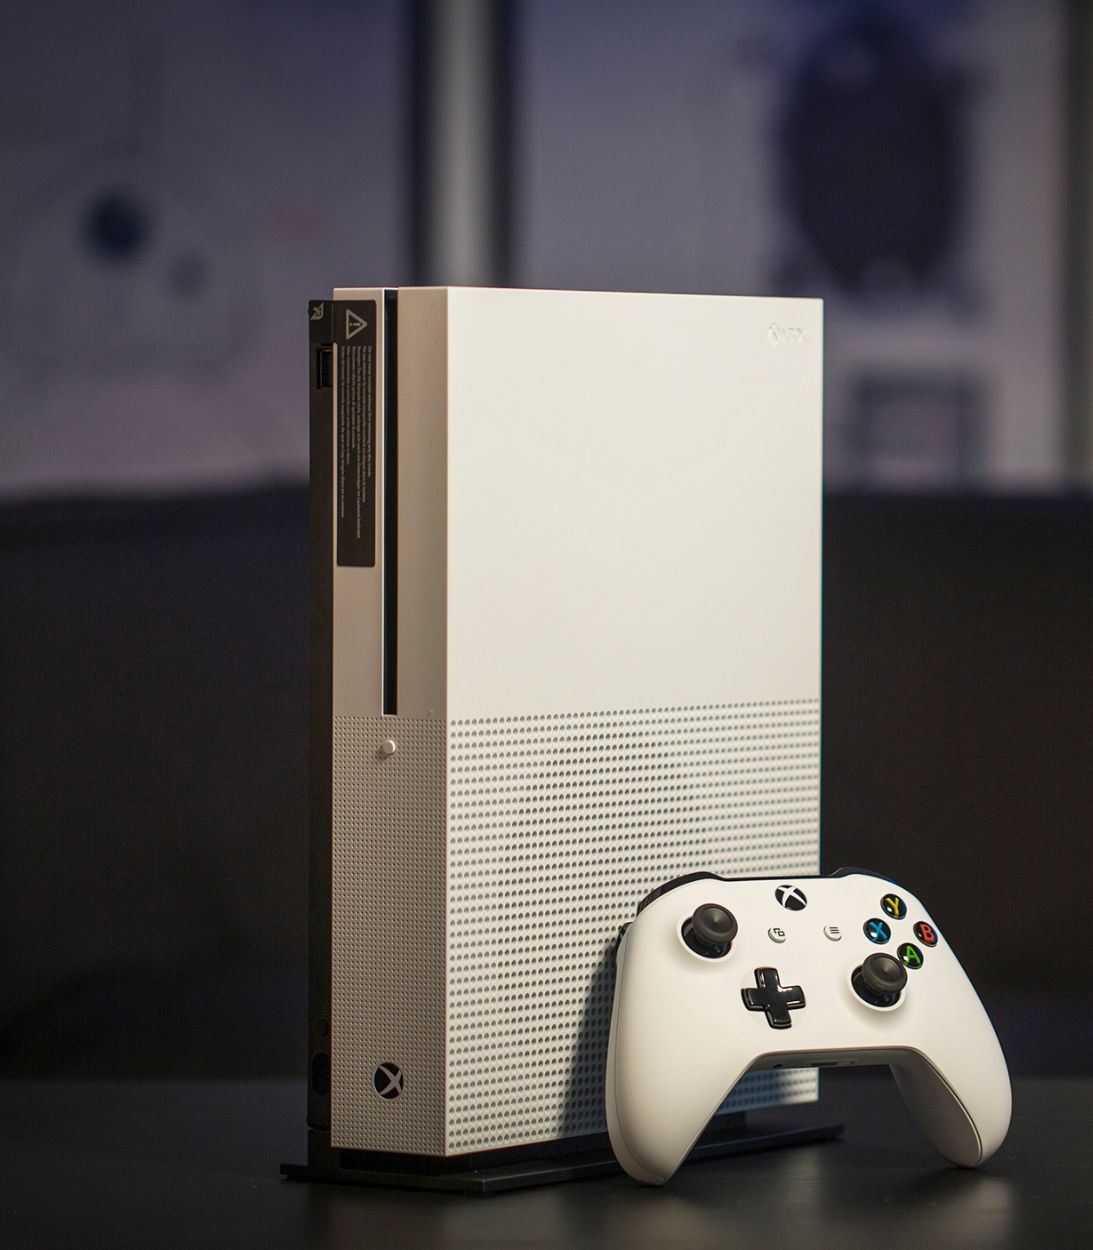 Microsoft Xbox One S Standing Vertical